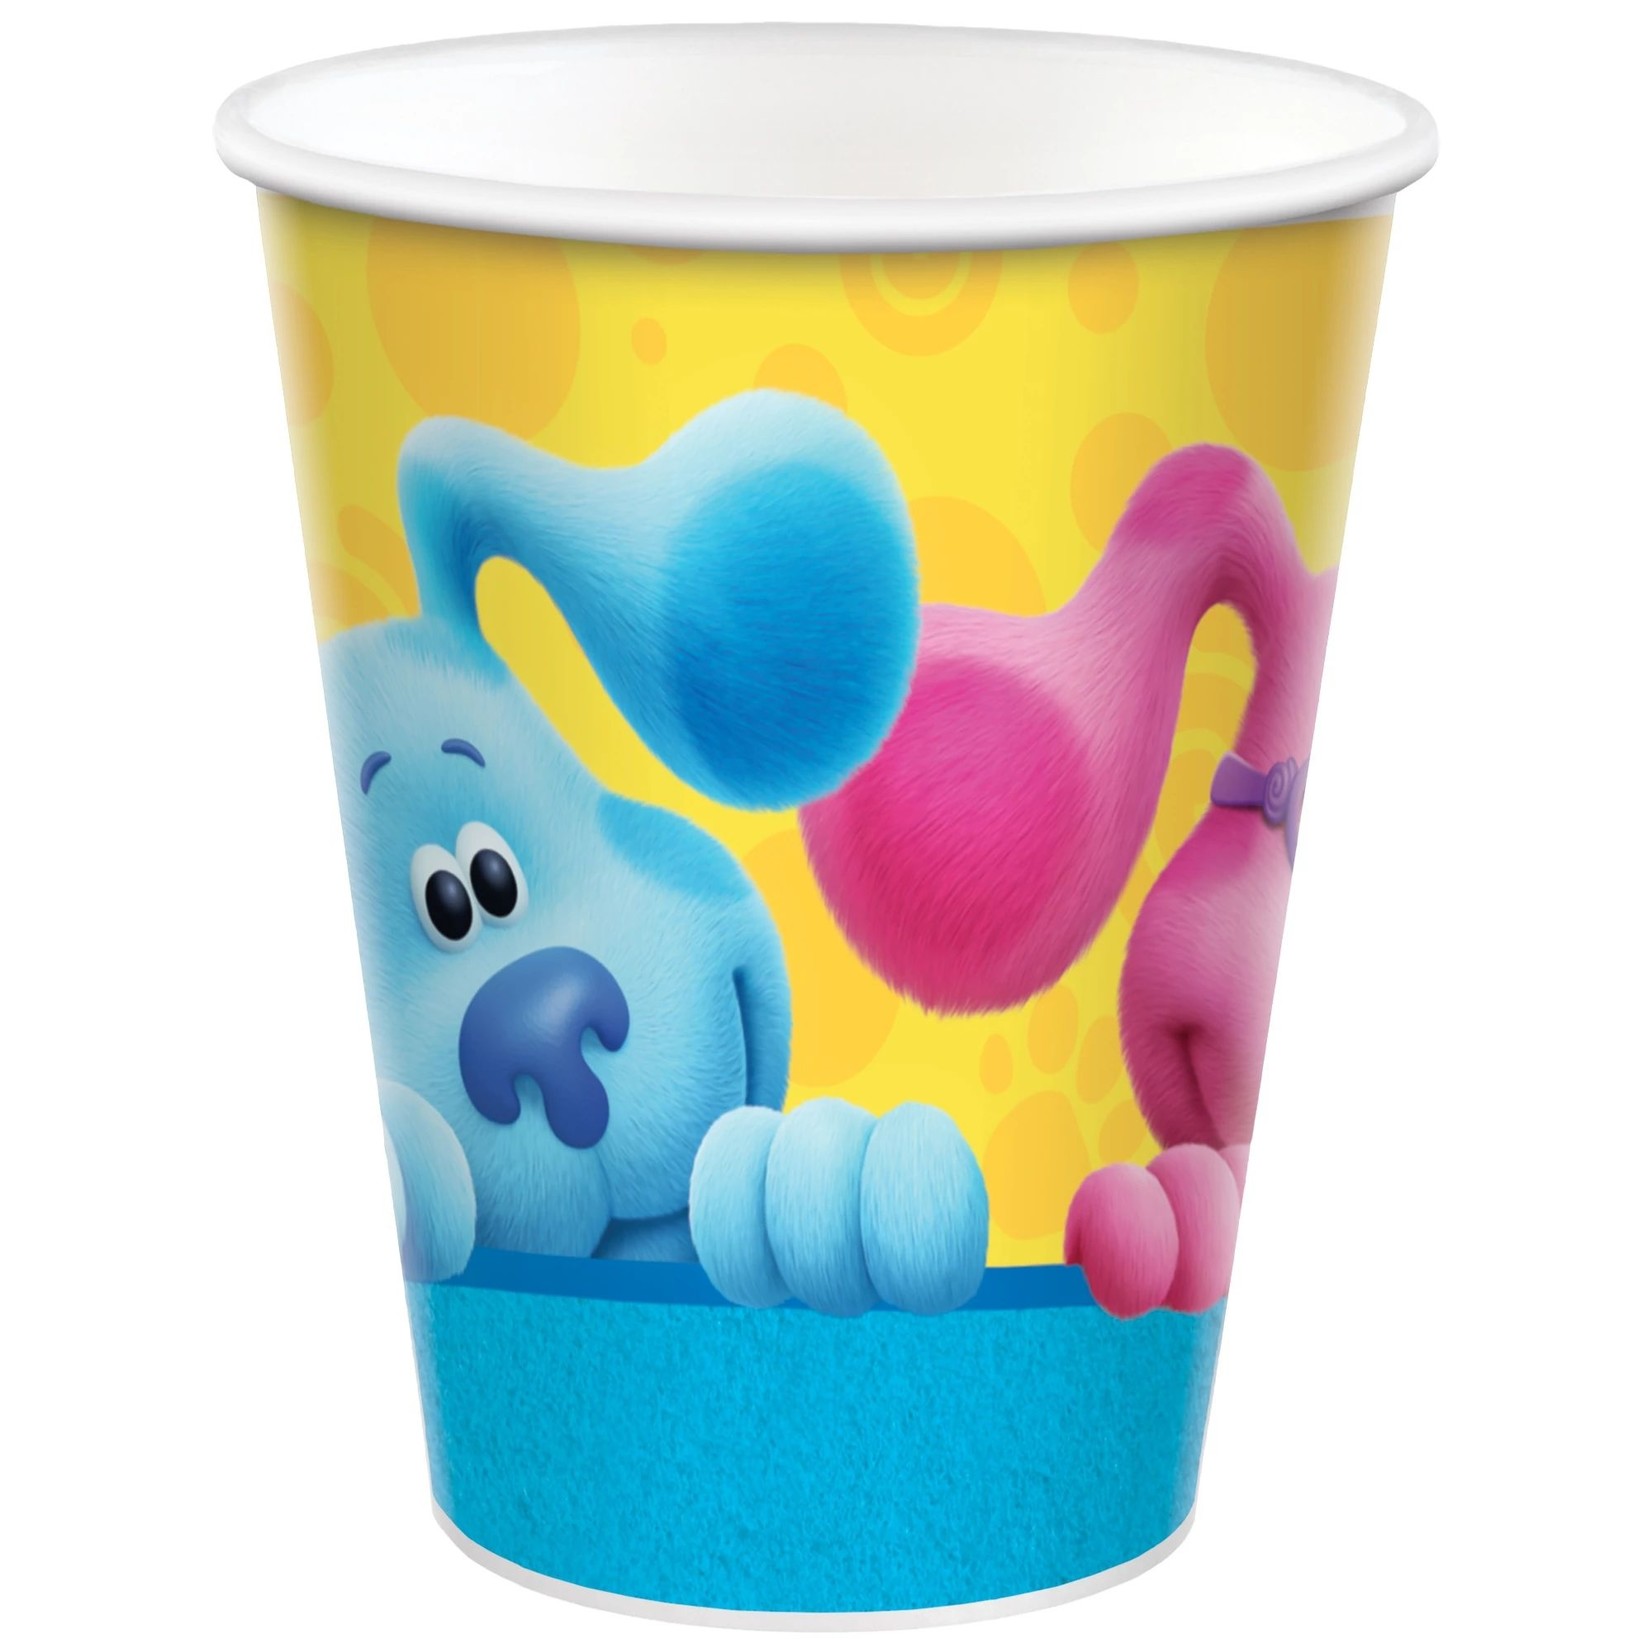 Blue' Clues Cups